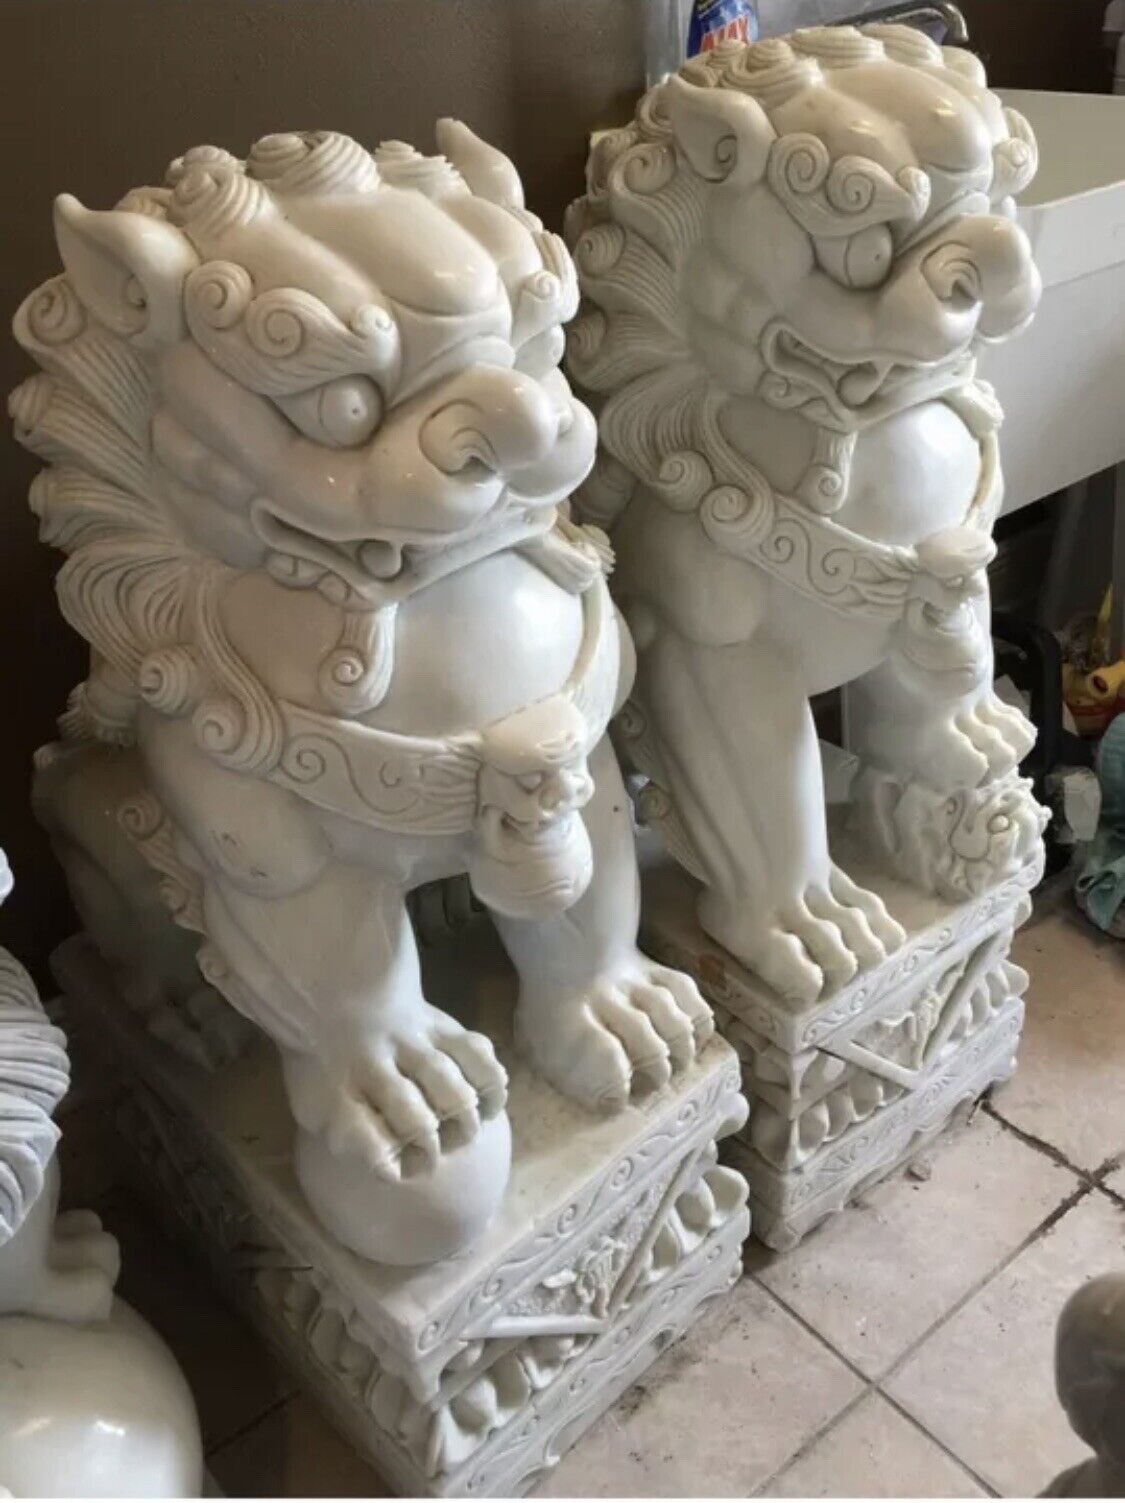 A pair of Chinese guardian lion statues made of genuine white stone.